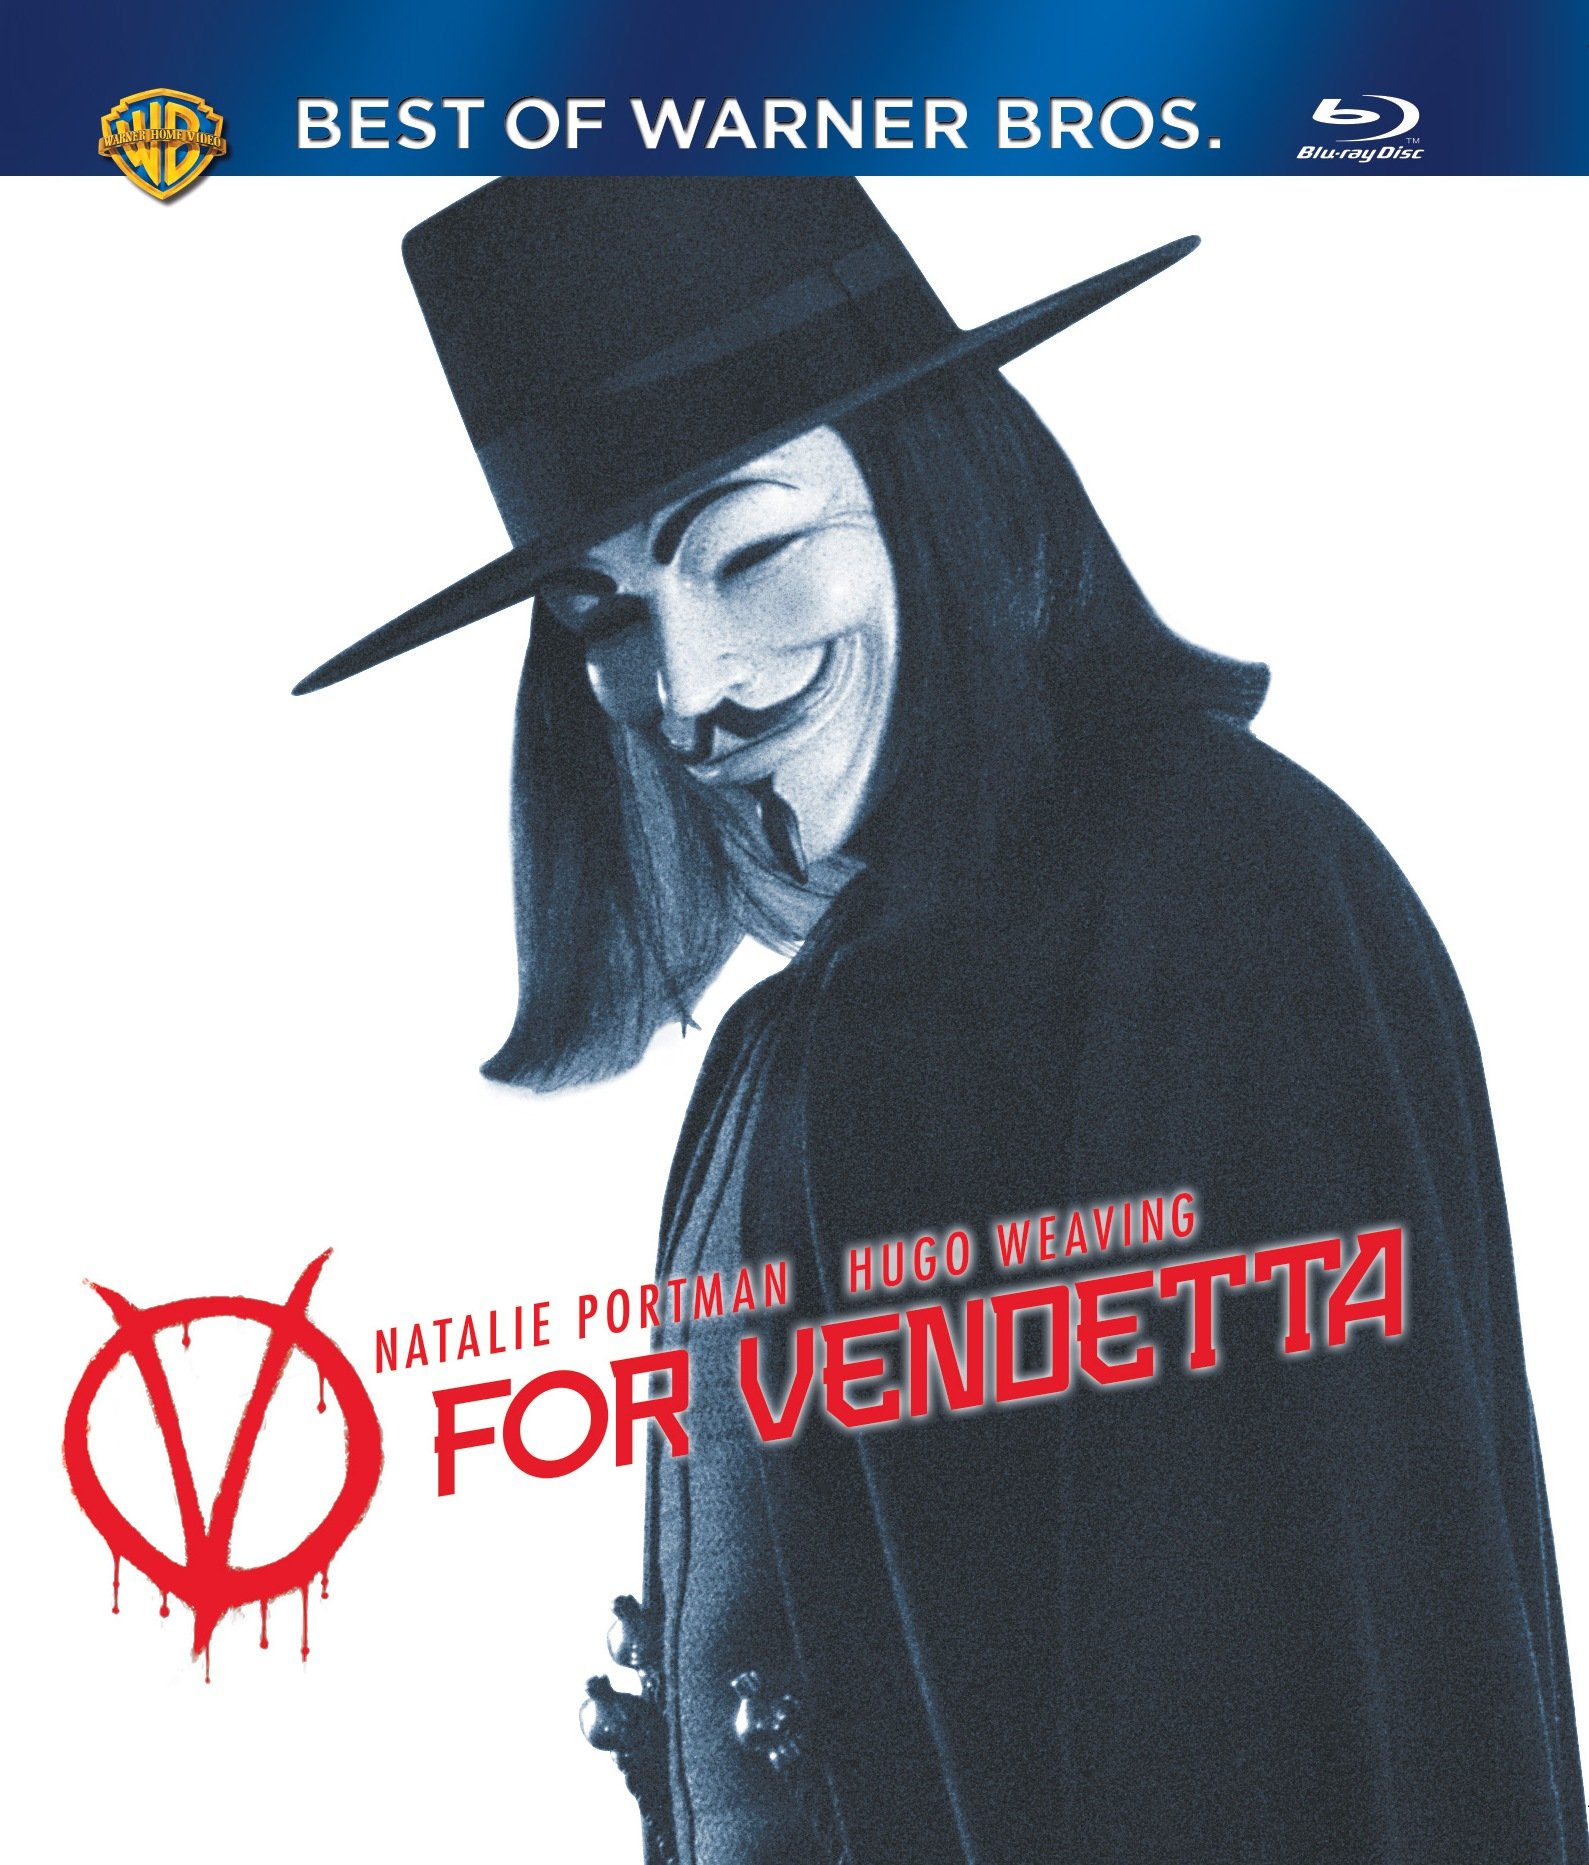 v-for-vendetta-movie-purchase-or-watch-online